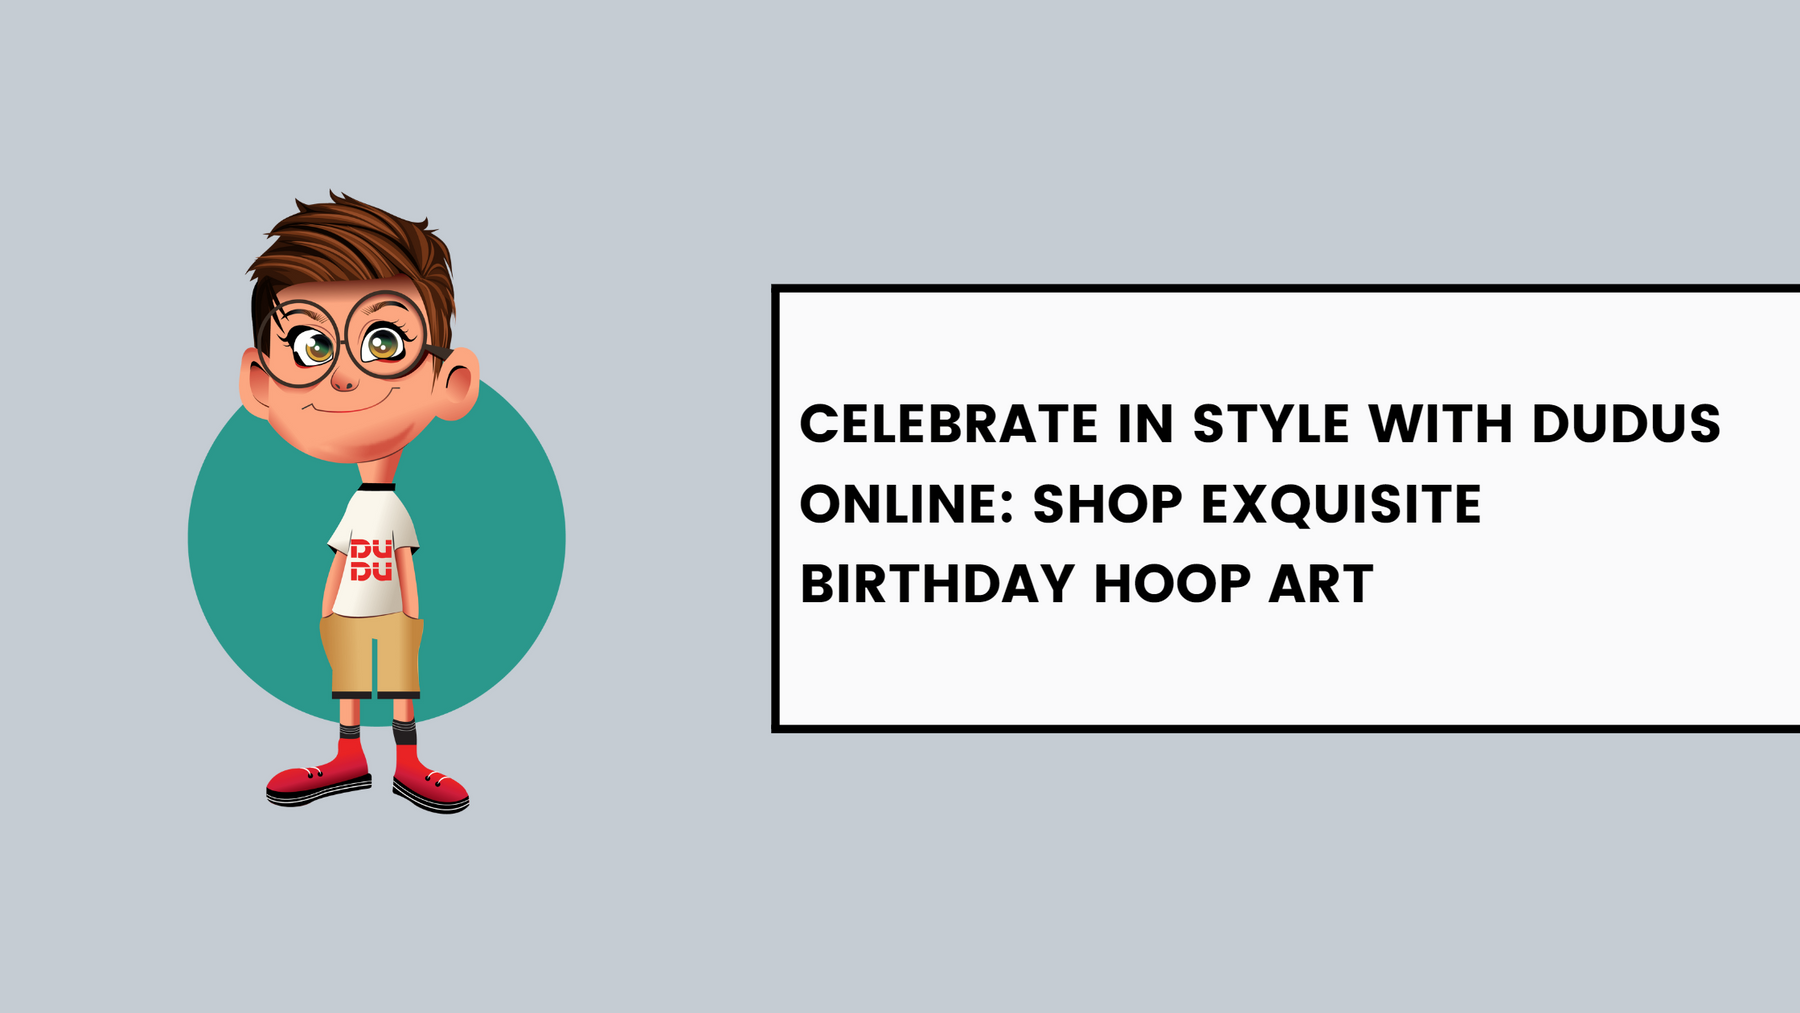 Celebrate in Style with Dudus Online: Shop Exquisite Birthday Hoop Art